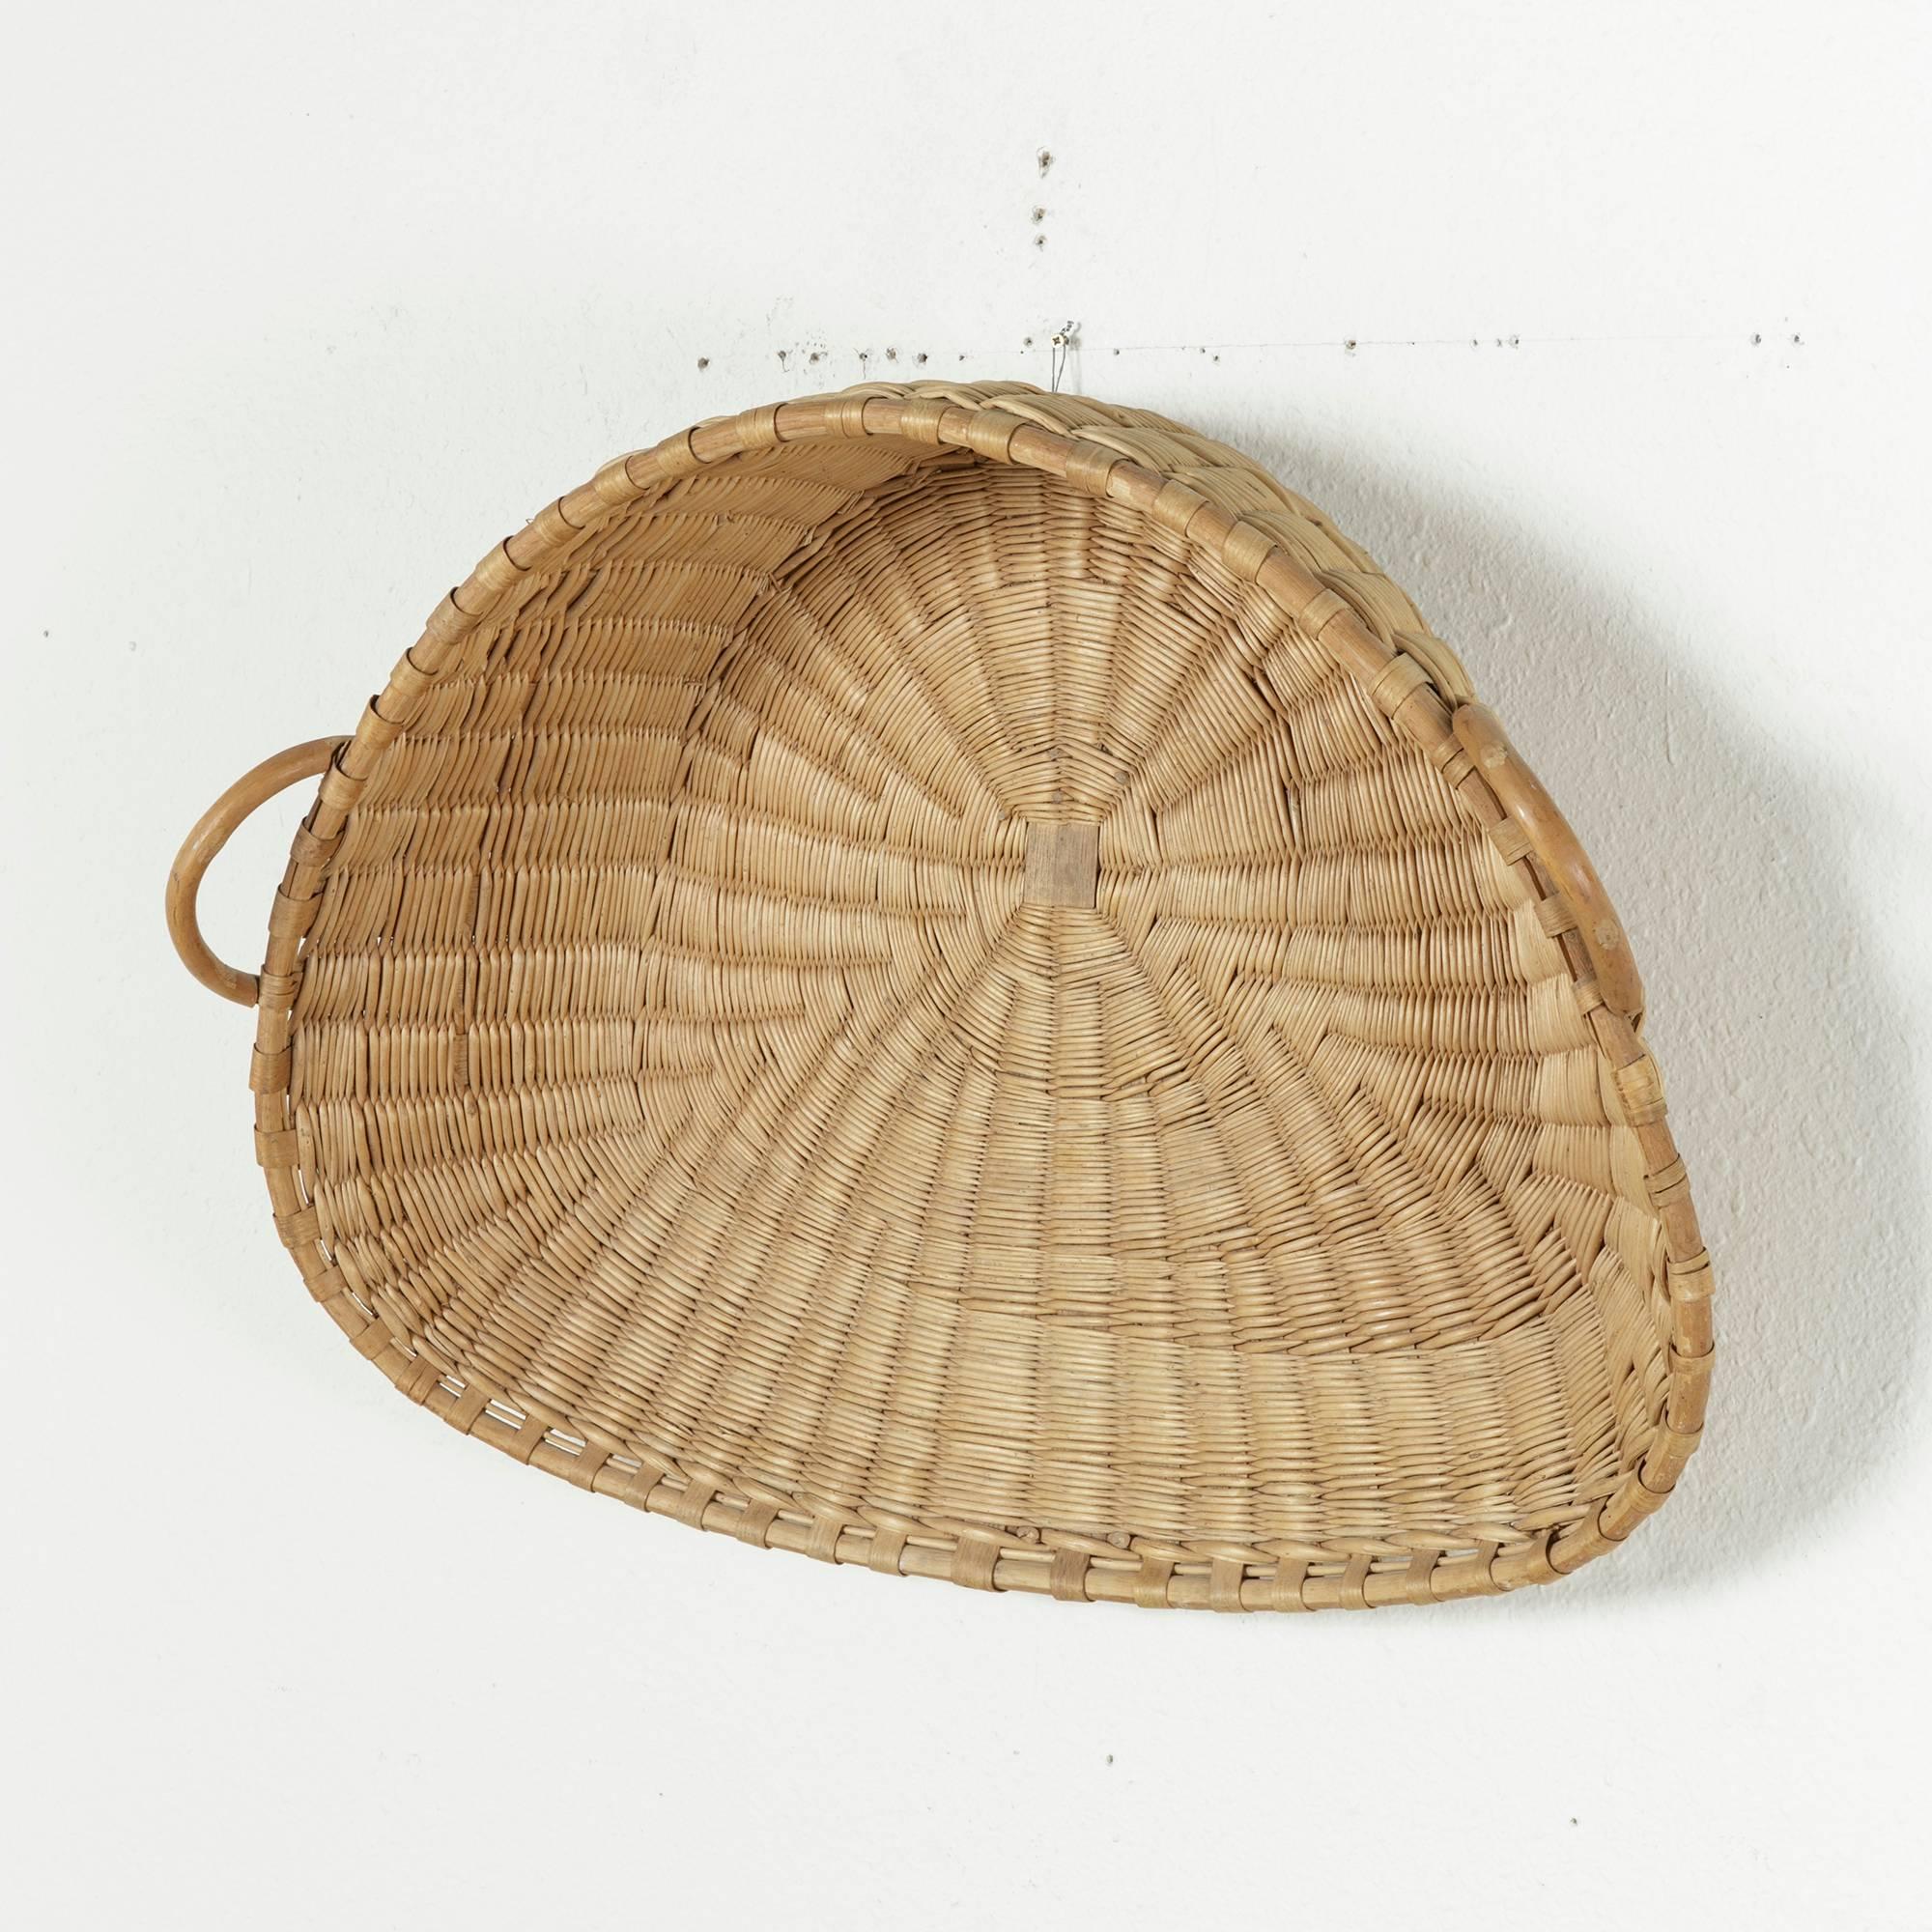 This exquisite 19th century handwoven French winnowing basket with wooden handles is in pristine condition. It was originally used to separate the wheat from the chaff by holding the flat side of the basket against one's stomach and tossing the